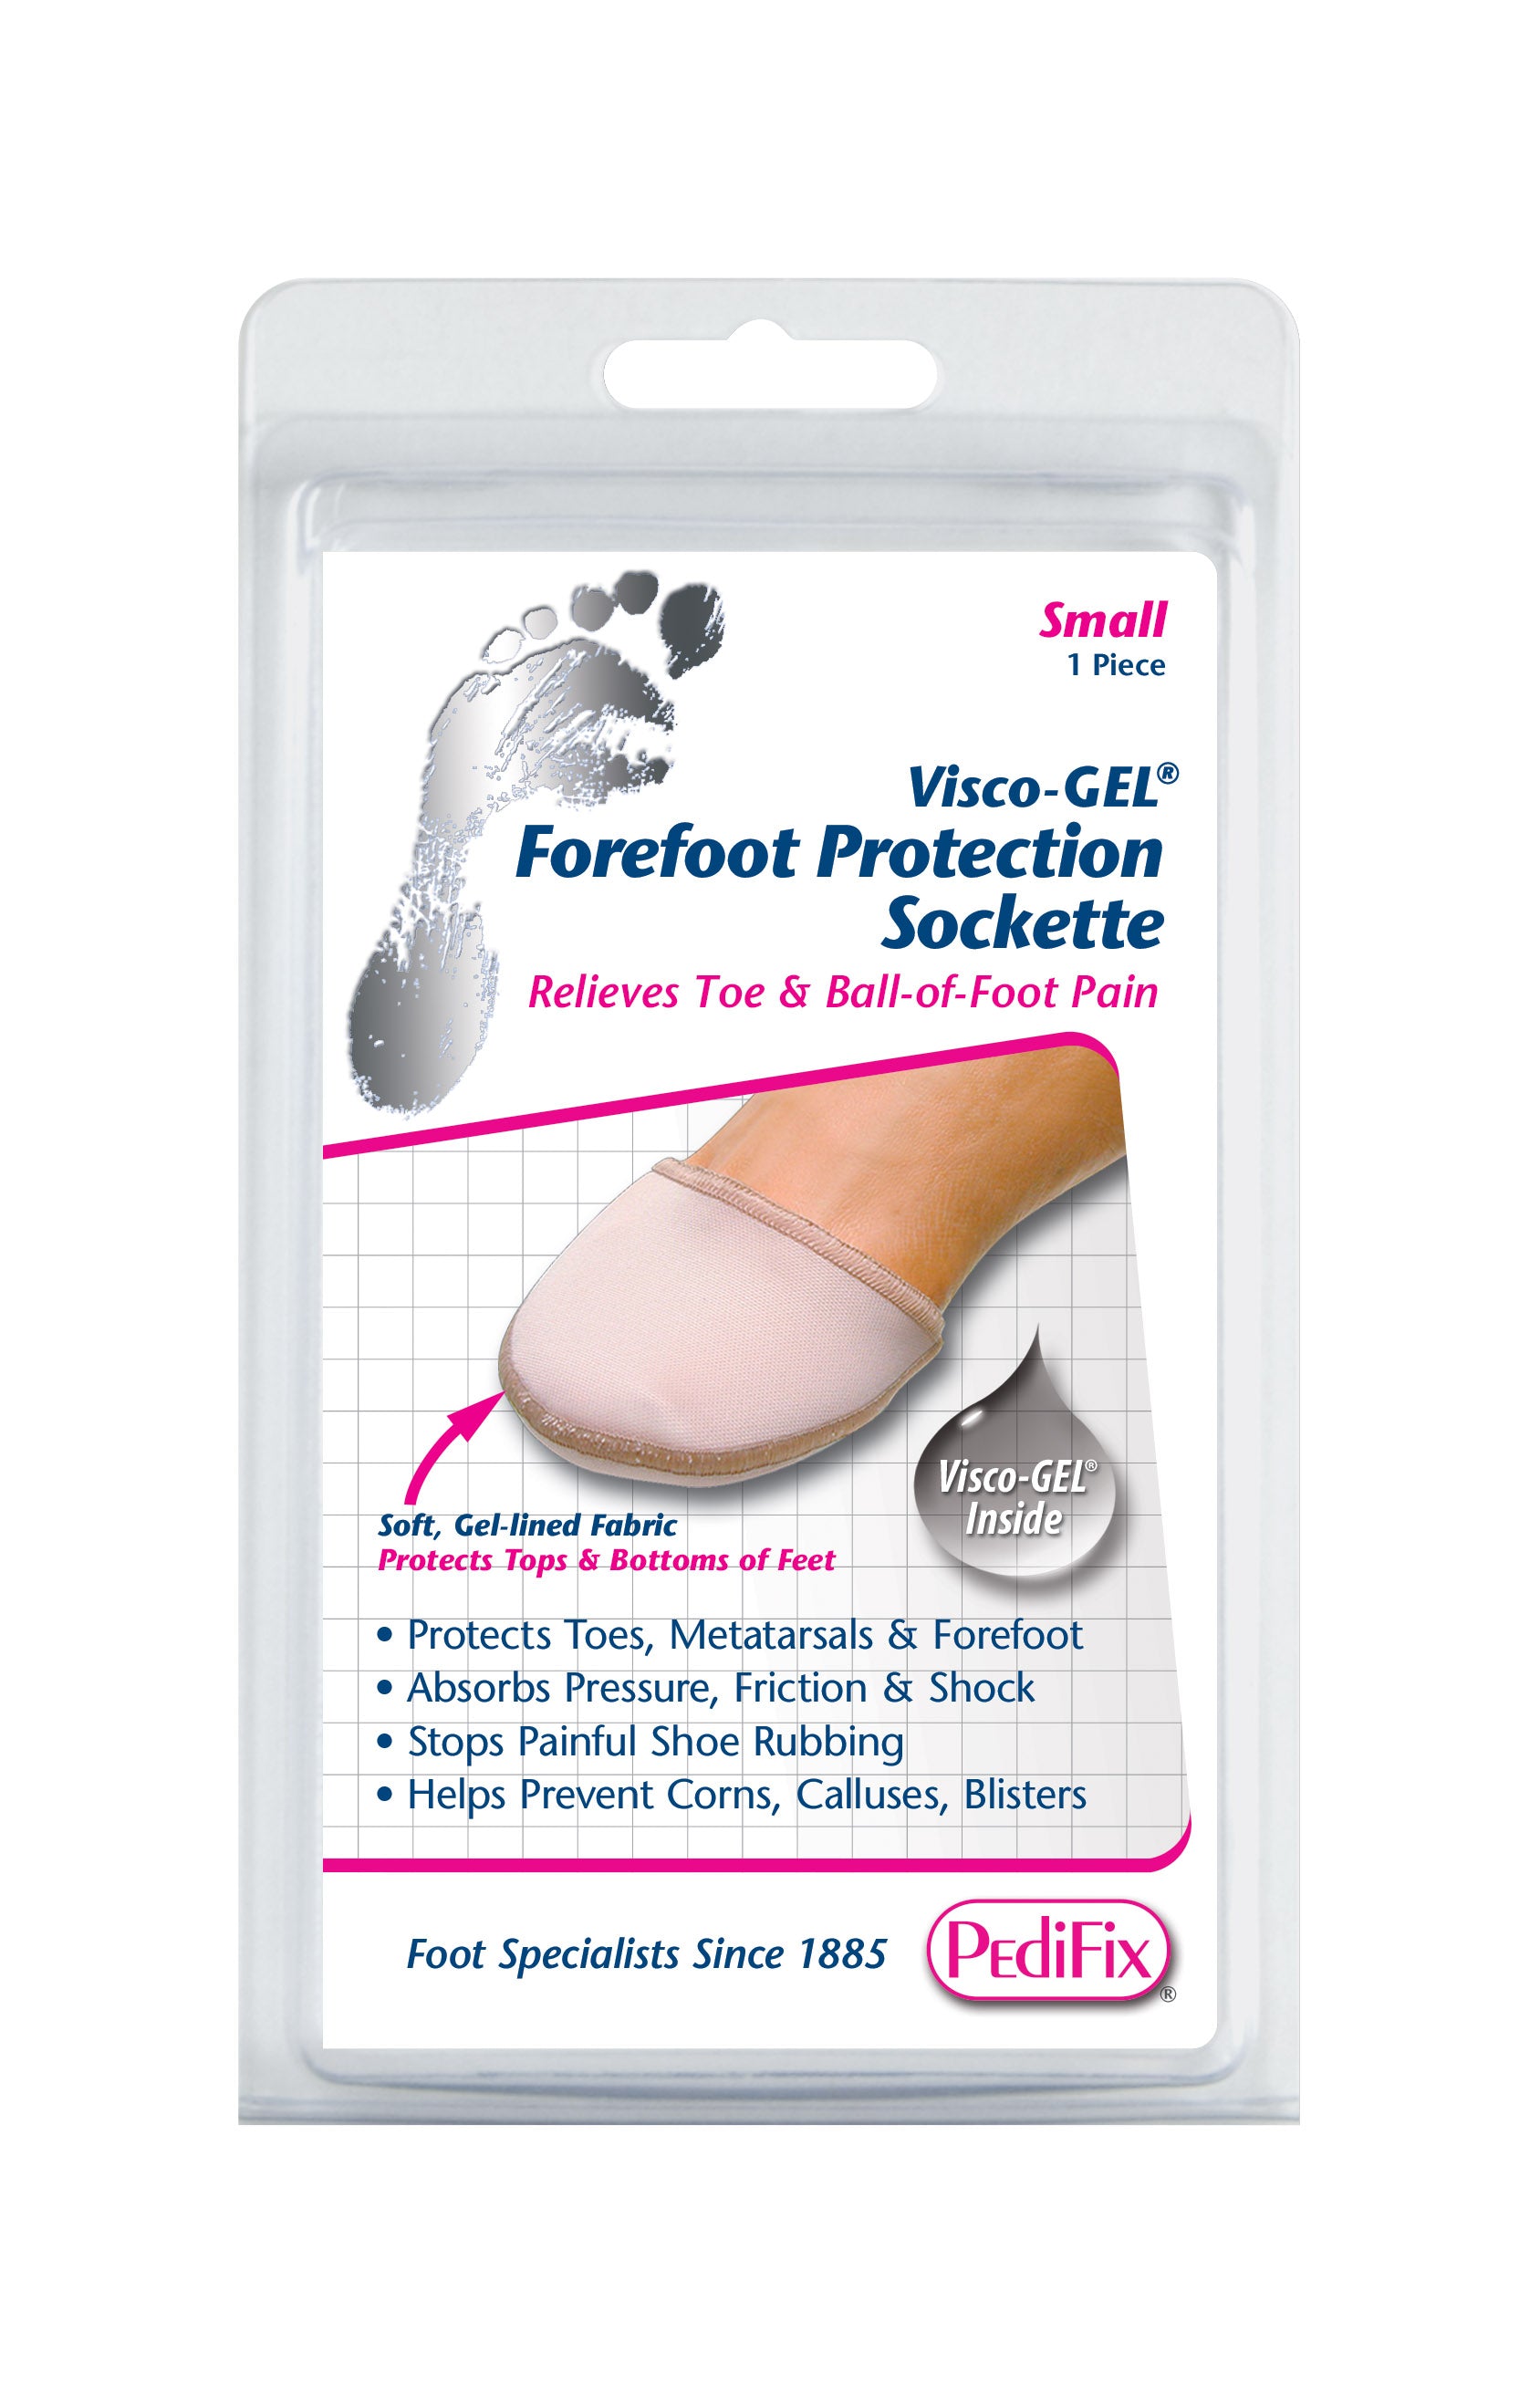 PEDIFIX VISCO-GEL FORFOOT PROTECTION SOCKETTE SMALL